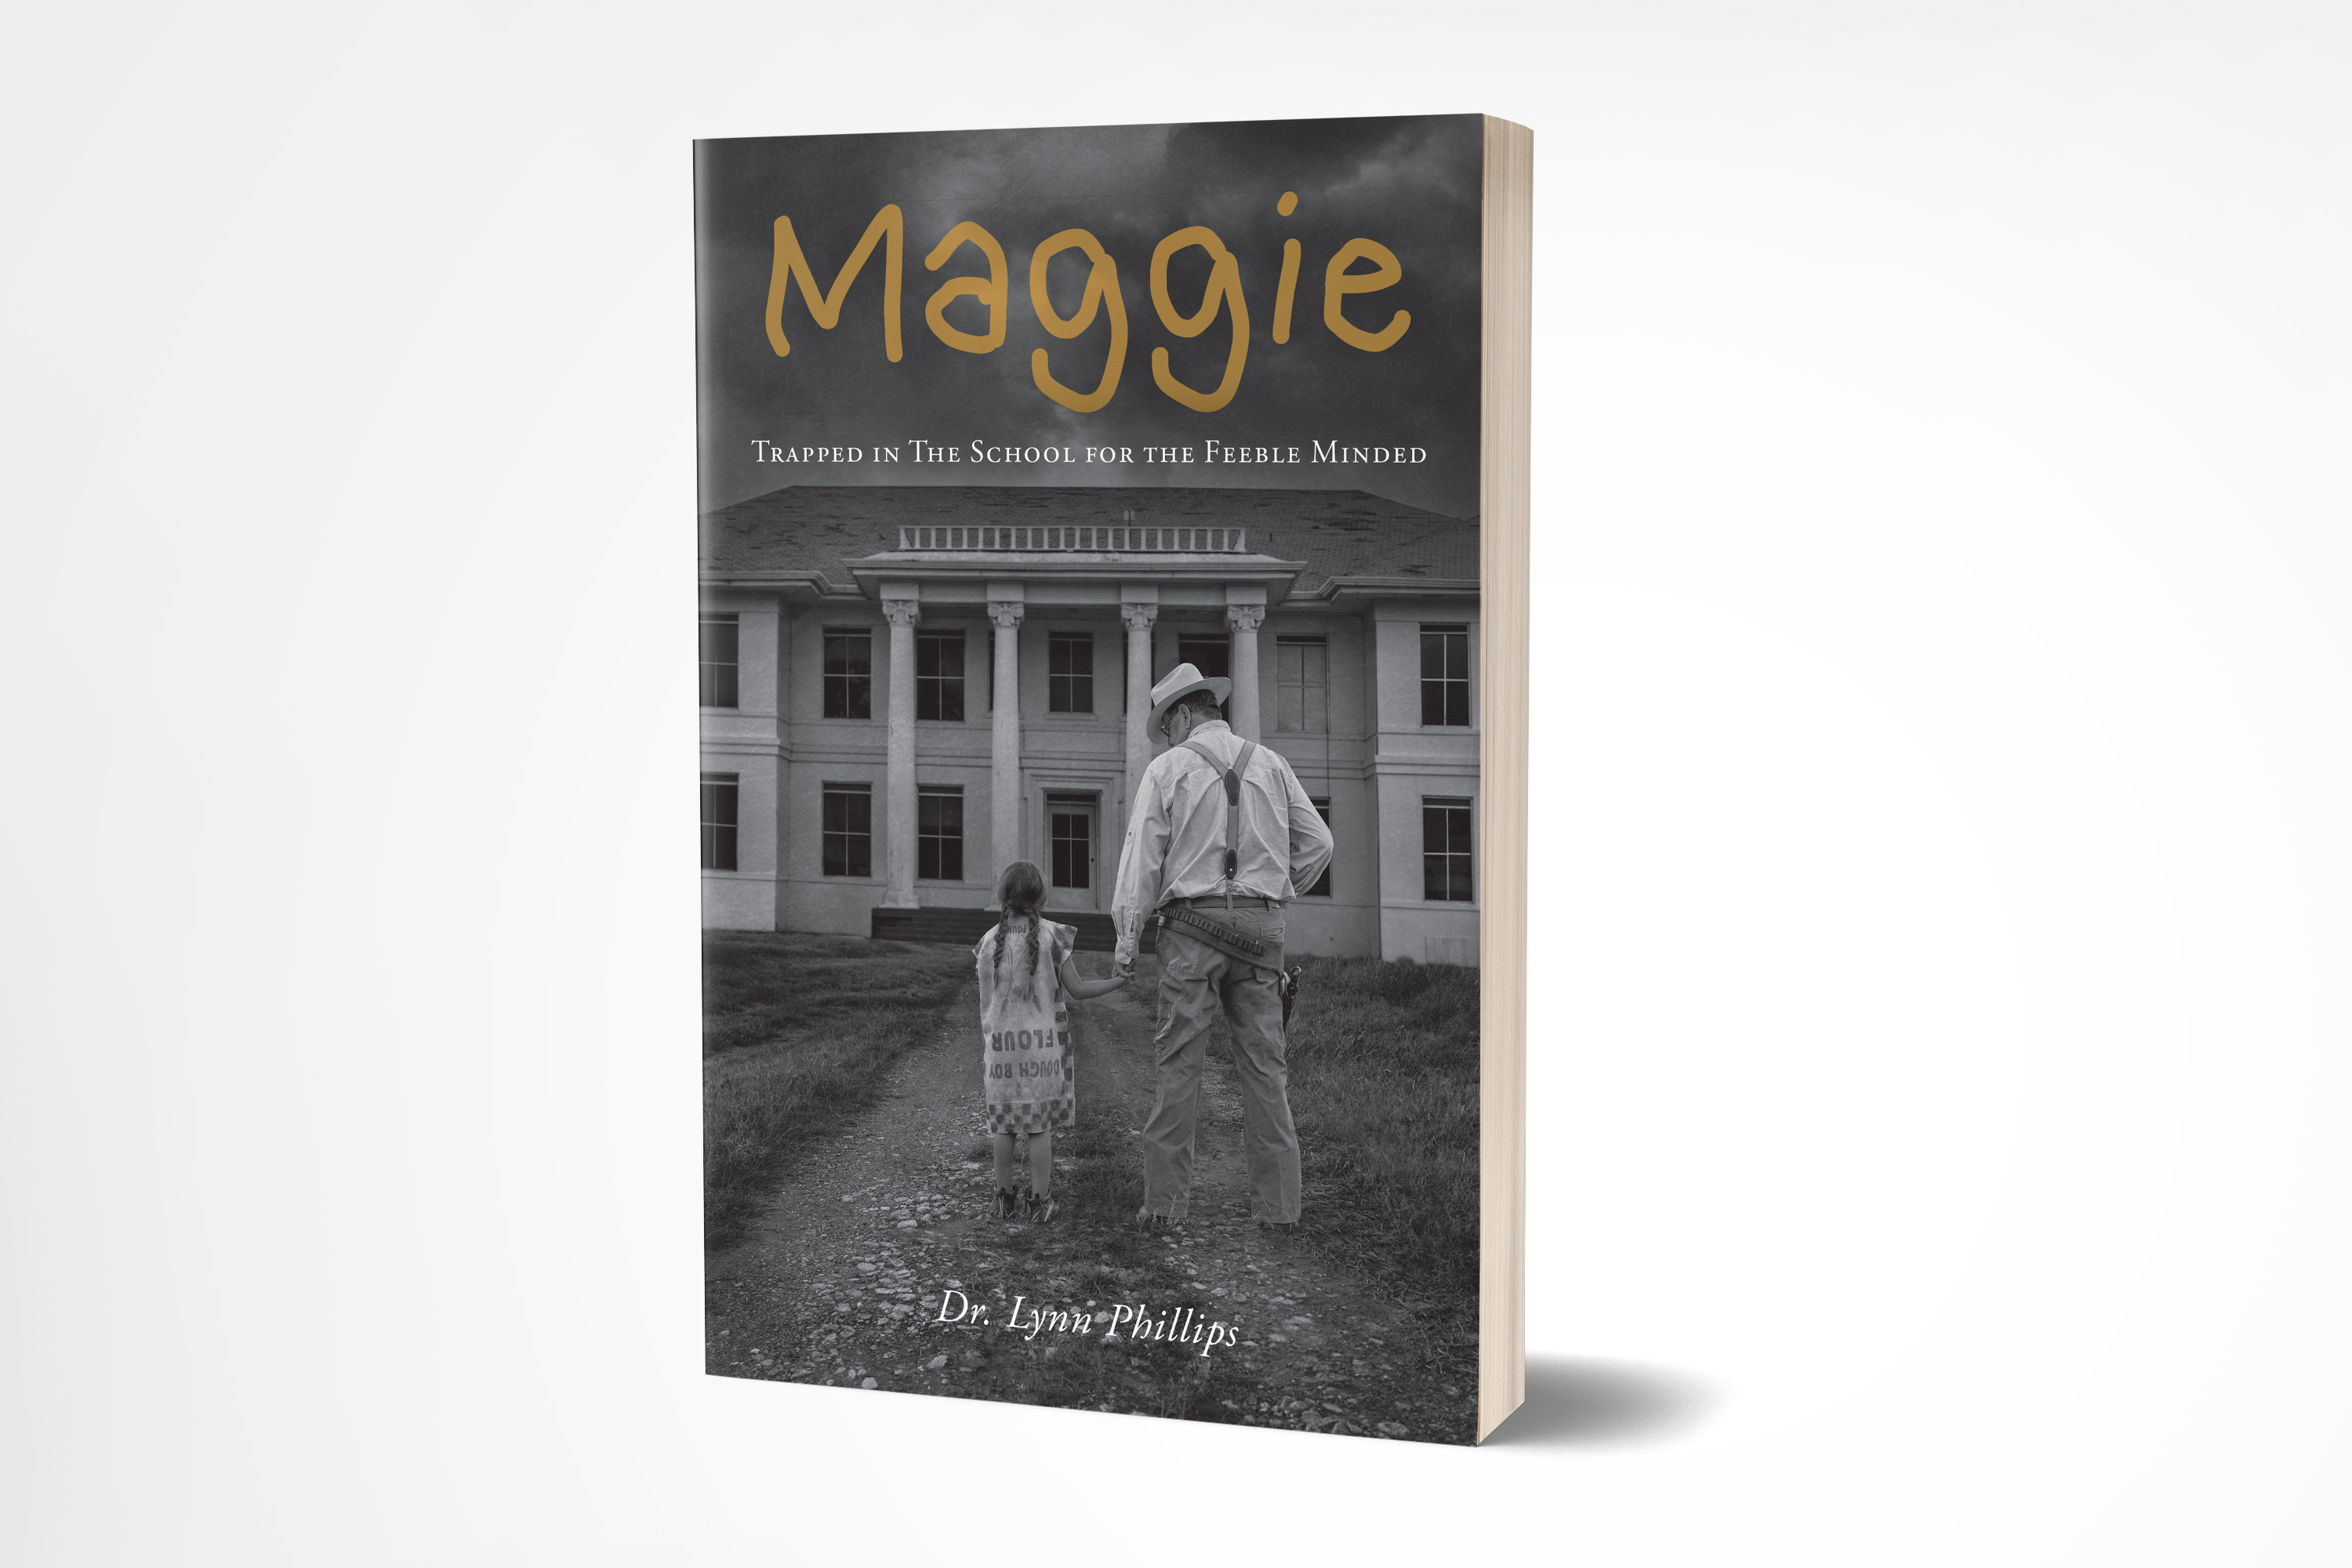 Maggie: Trapped in the School for the Feeble Minded